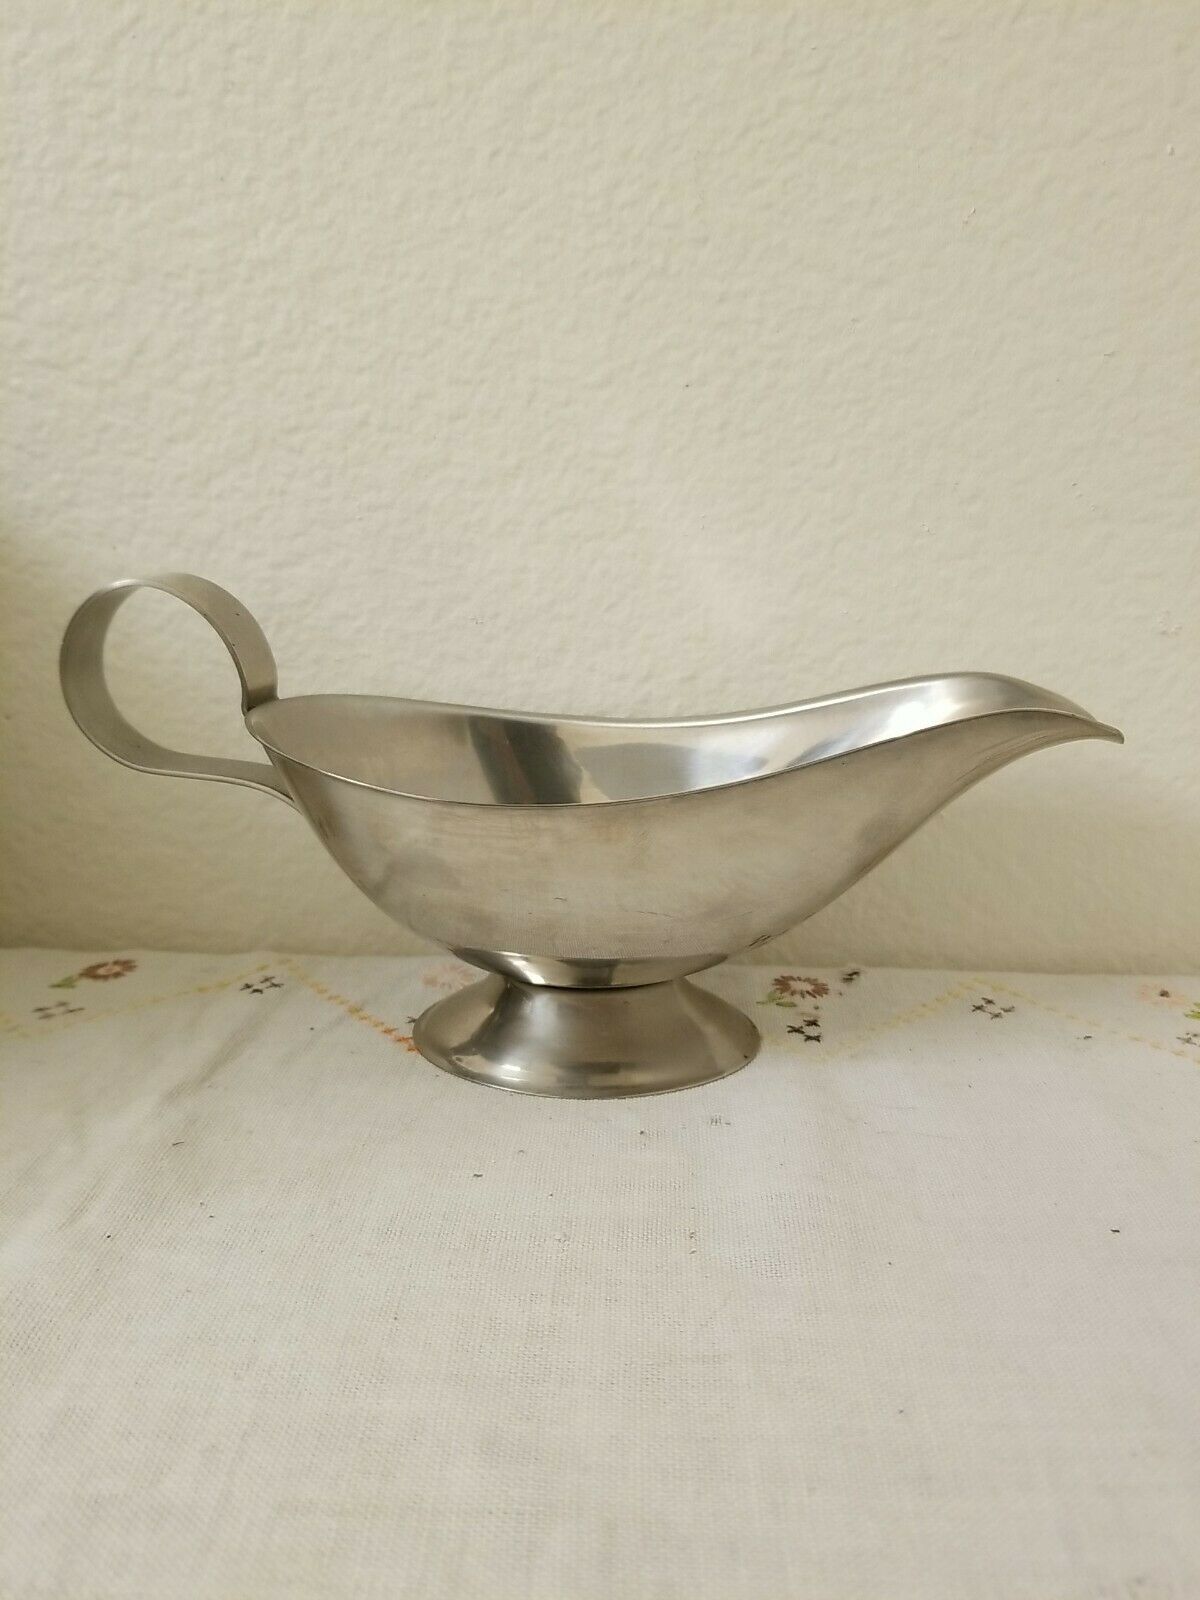 Silver Plated Gravy Boat Sauce Boat Server 1.25 Cups